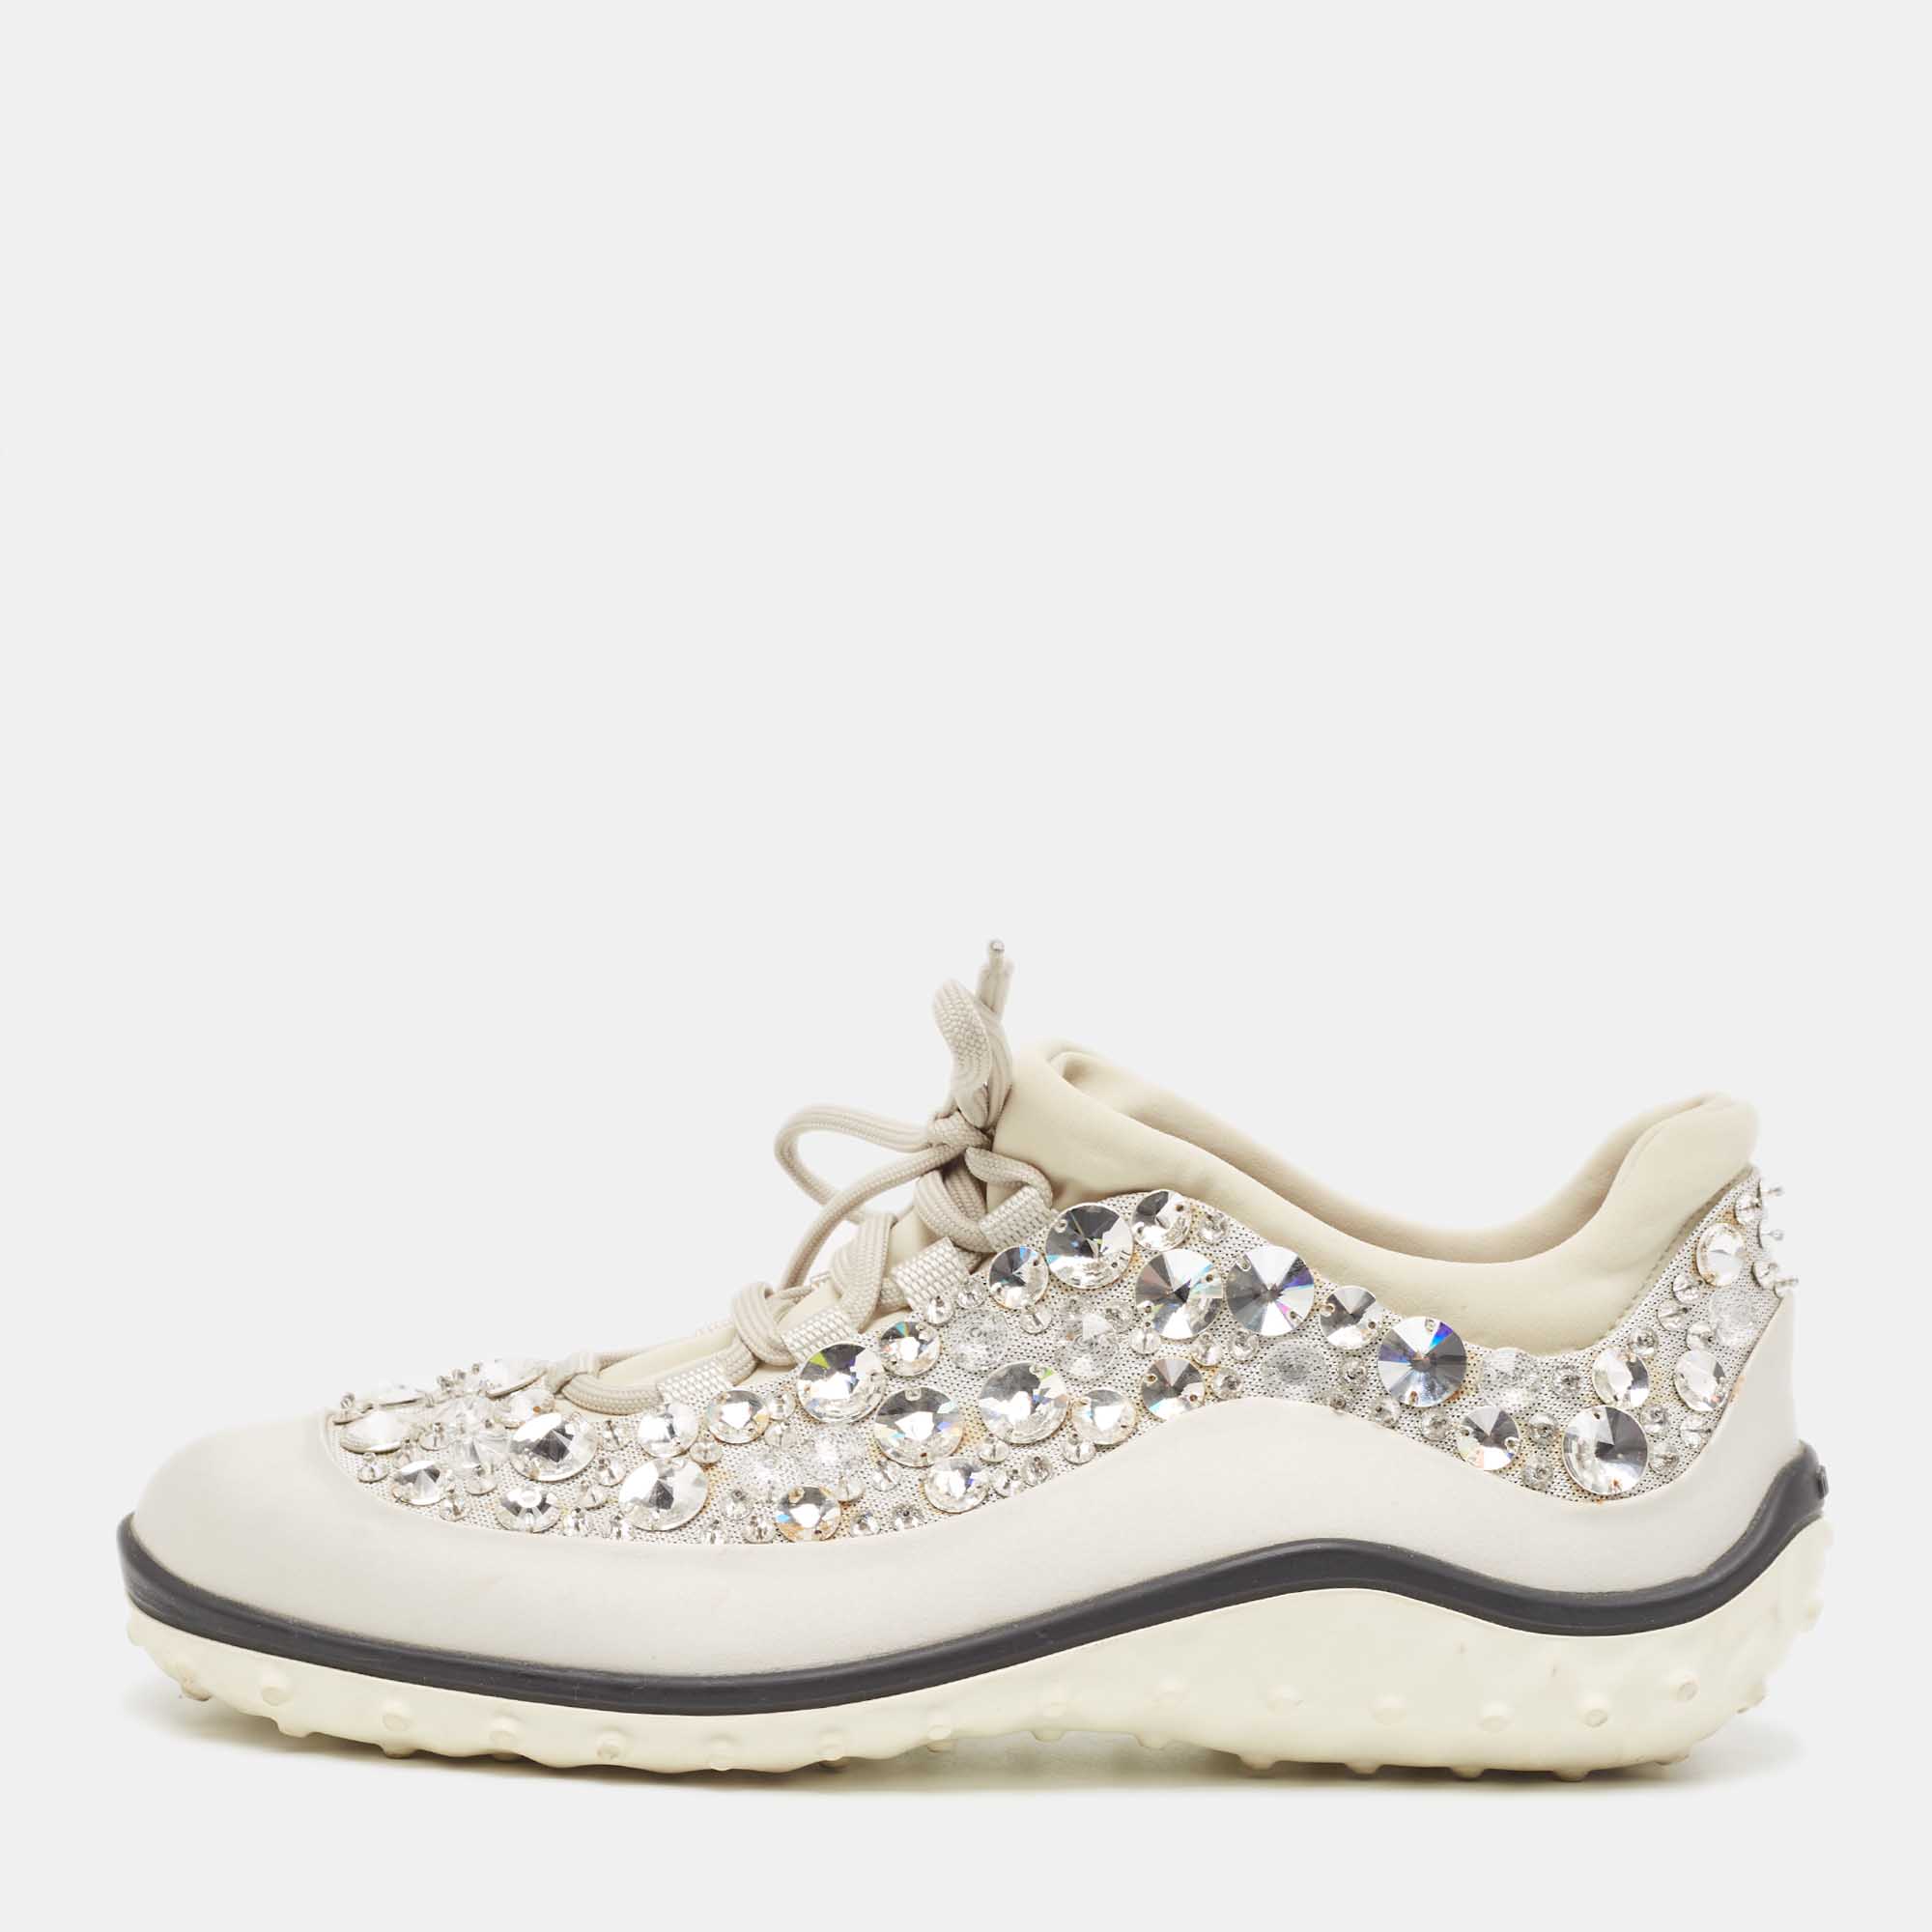 Pre-owned Miu Miu Silver Satin Astro Crystal Embellished Low Top Sneakers Size 39